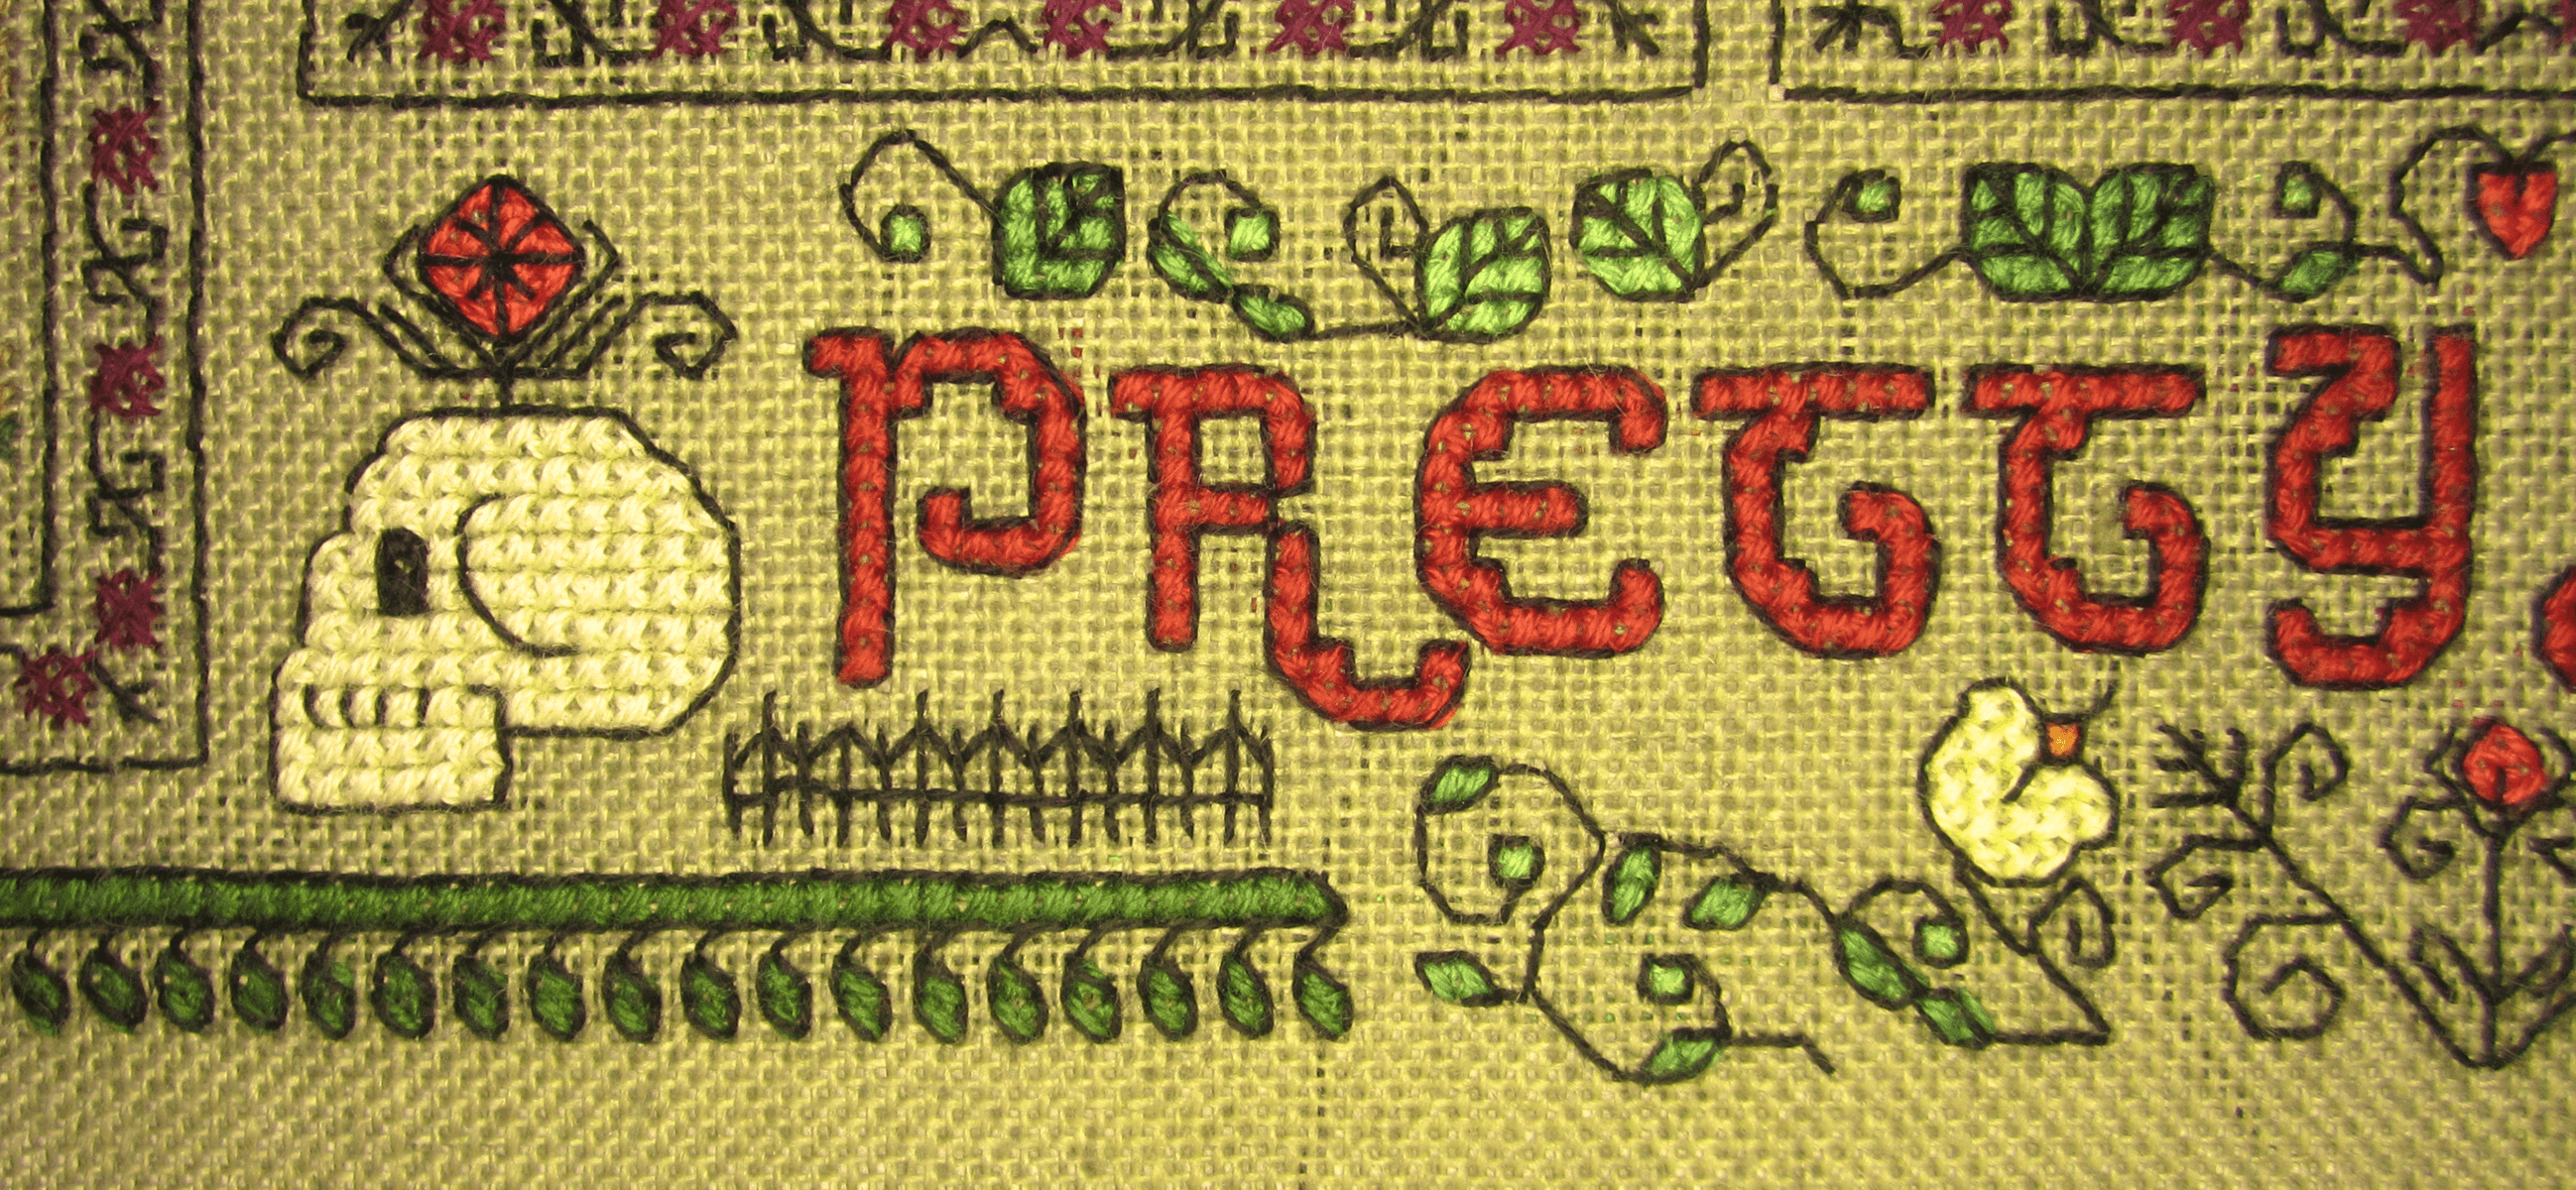 image description: a close-up of a small portion of the border of a cross-stitch project